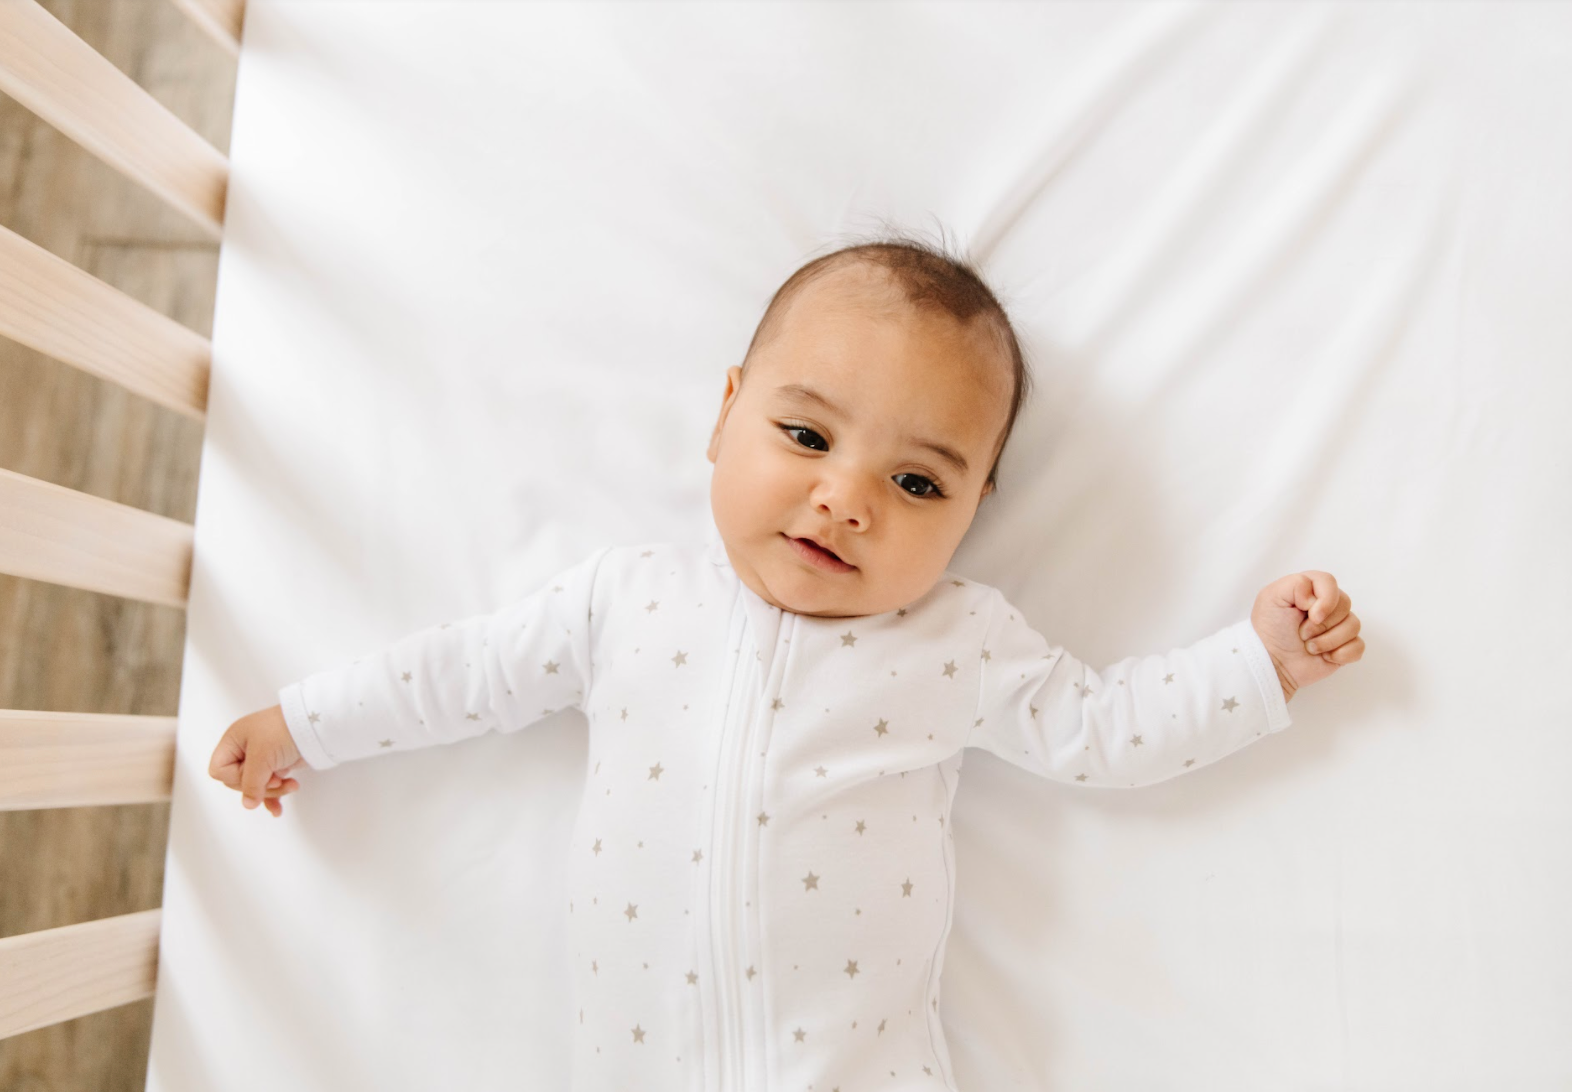 What Should My Baby Wear Under A Sleep Sack?